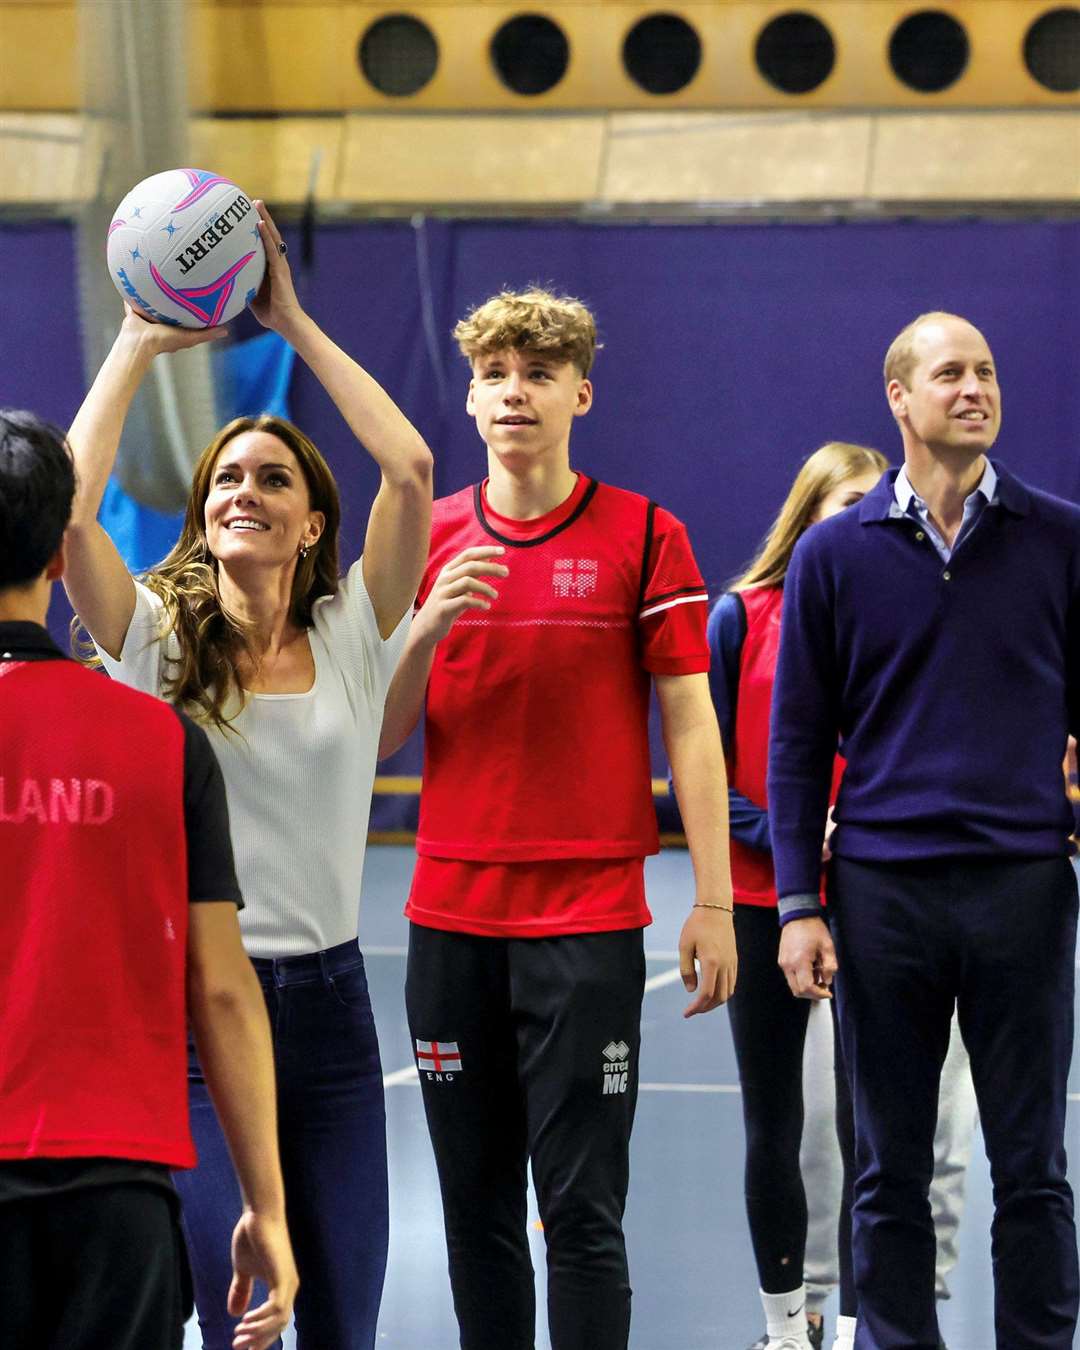 Meopham teenager Maxime Carolan alongside Prince William as the Princess of Wales goes for goal during a Sports Aid eventPicture: Instagram/@princeandprincessofwales